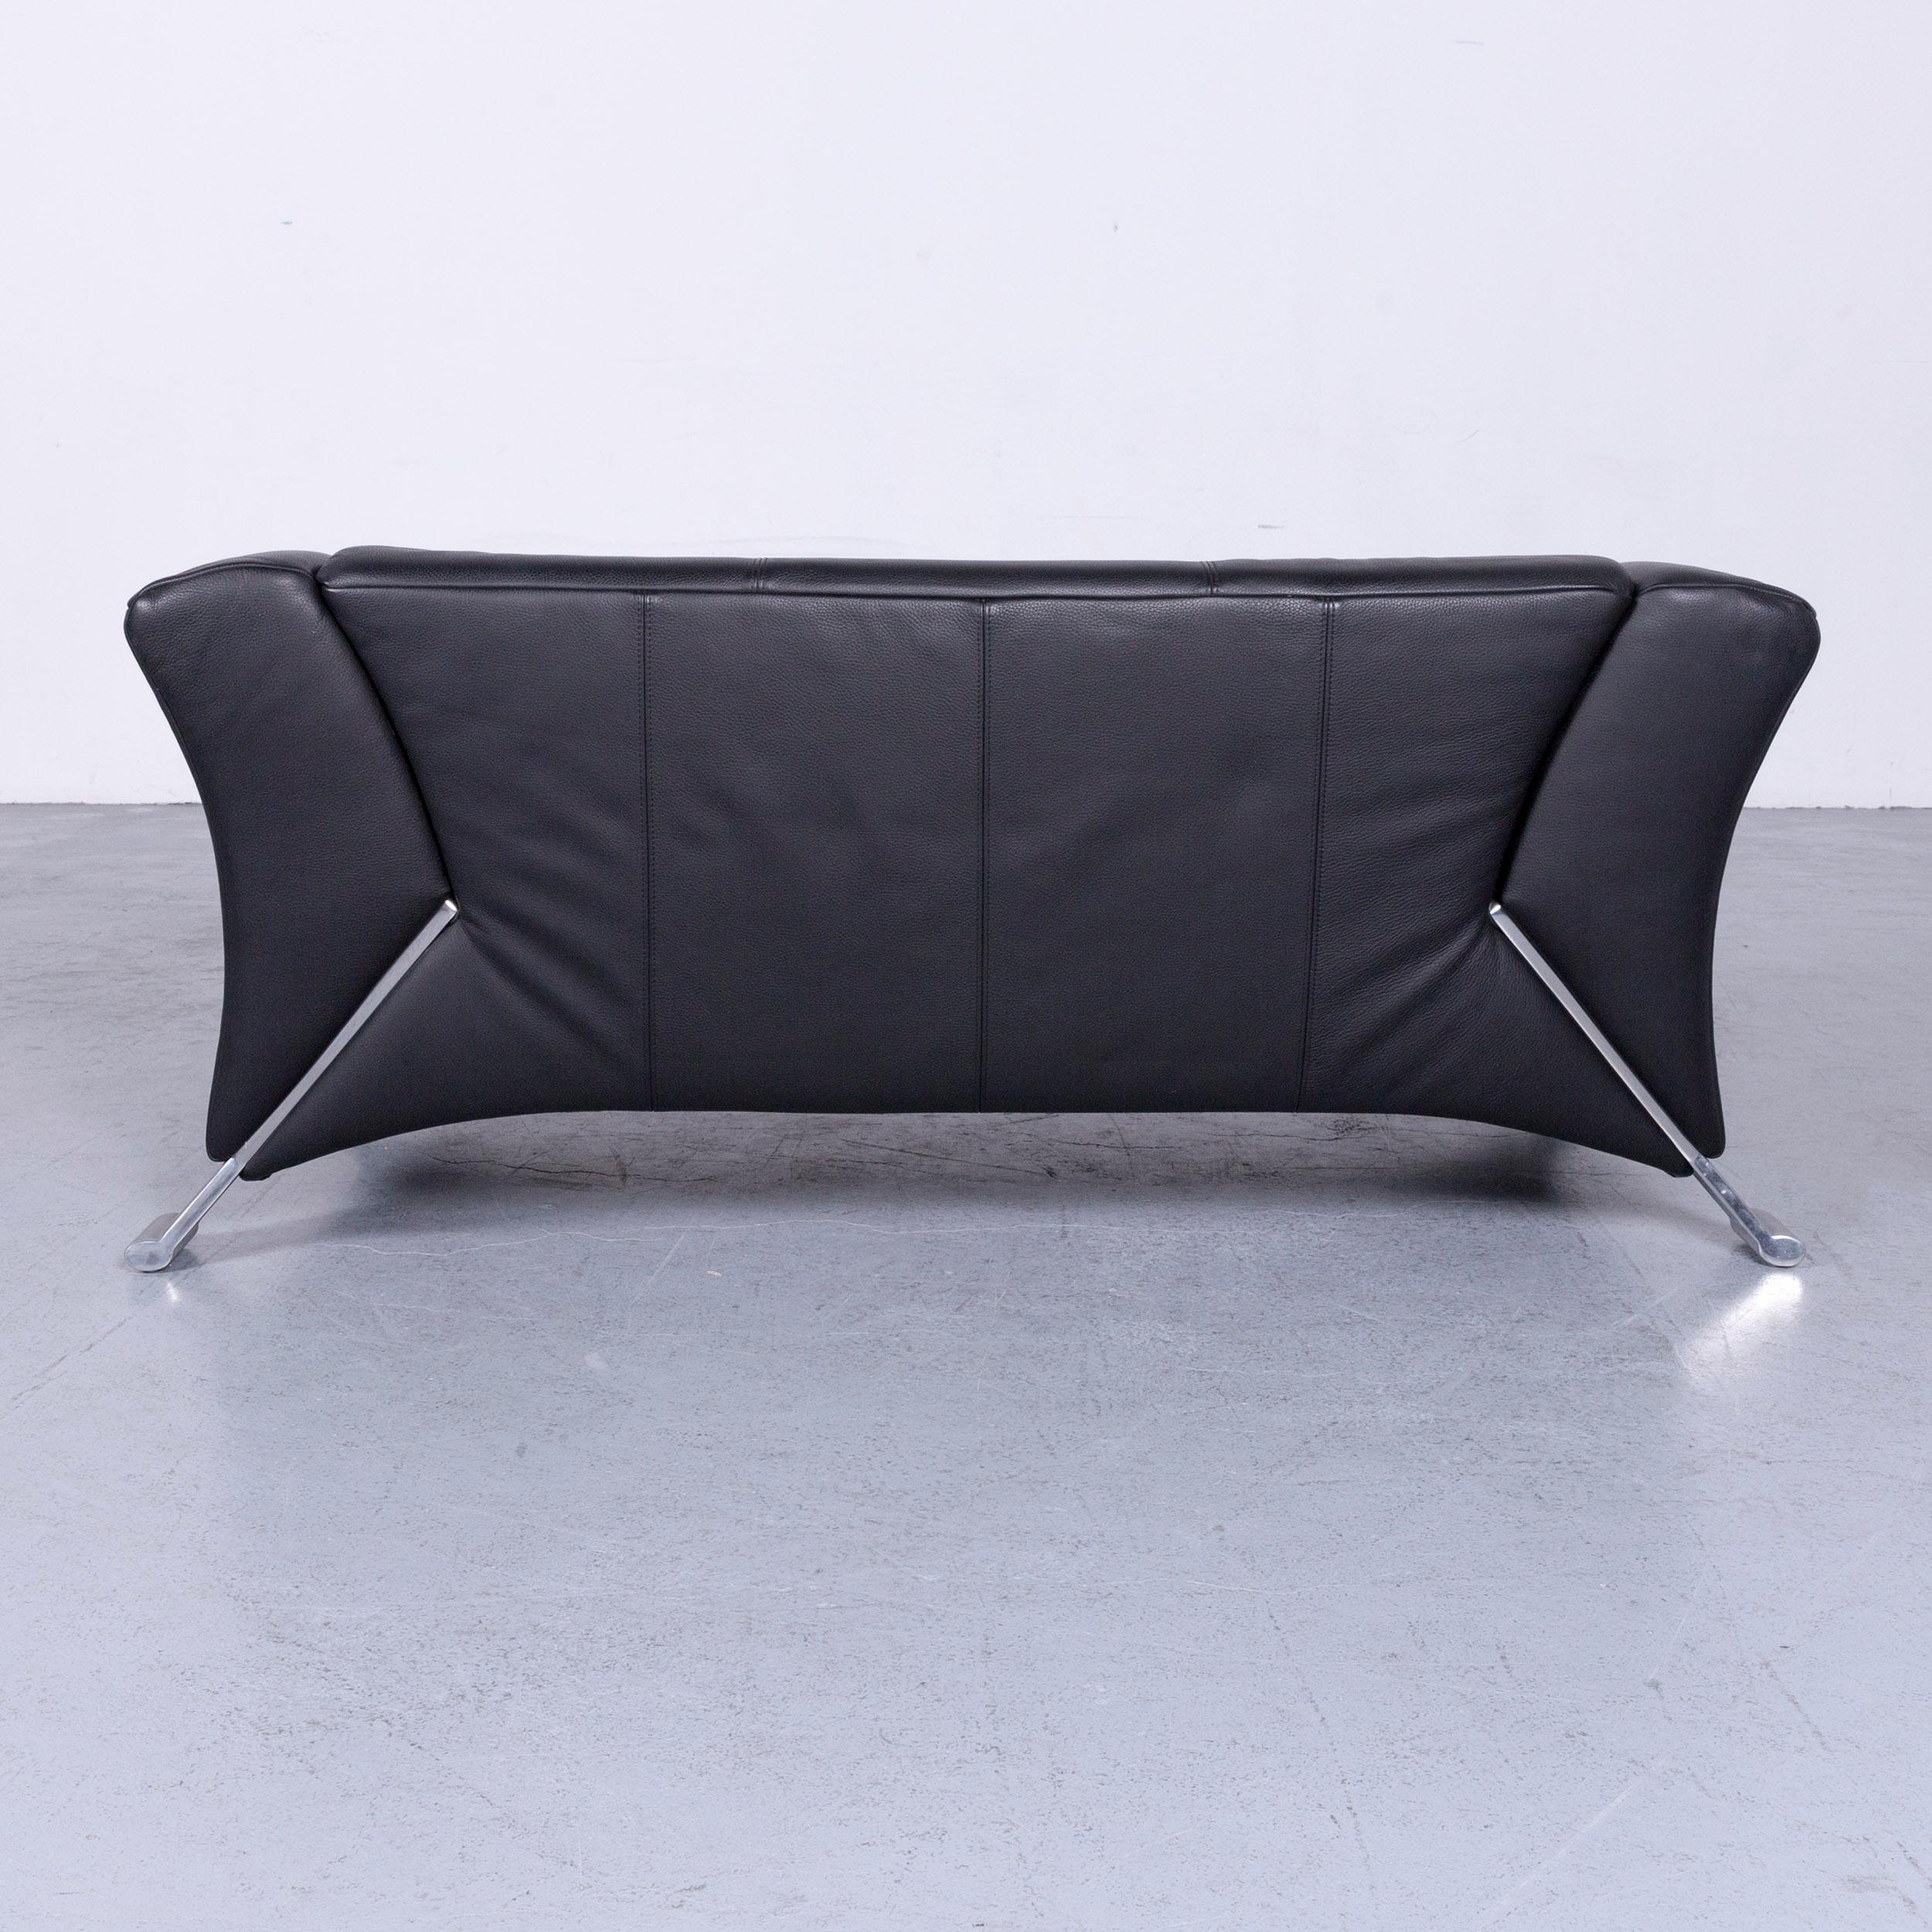 Rolf Benz 322 Designer Sofa Black Two-Seat Leather Couch 3